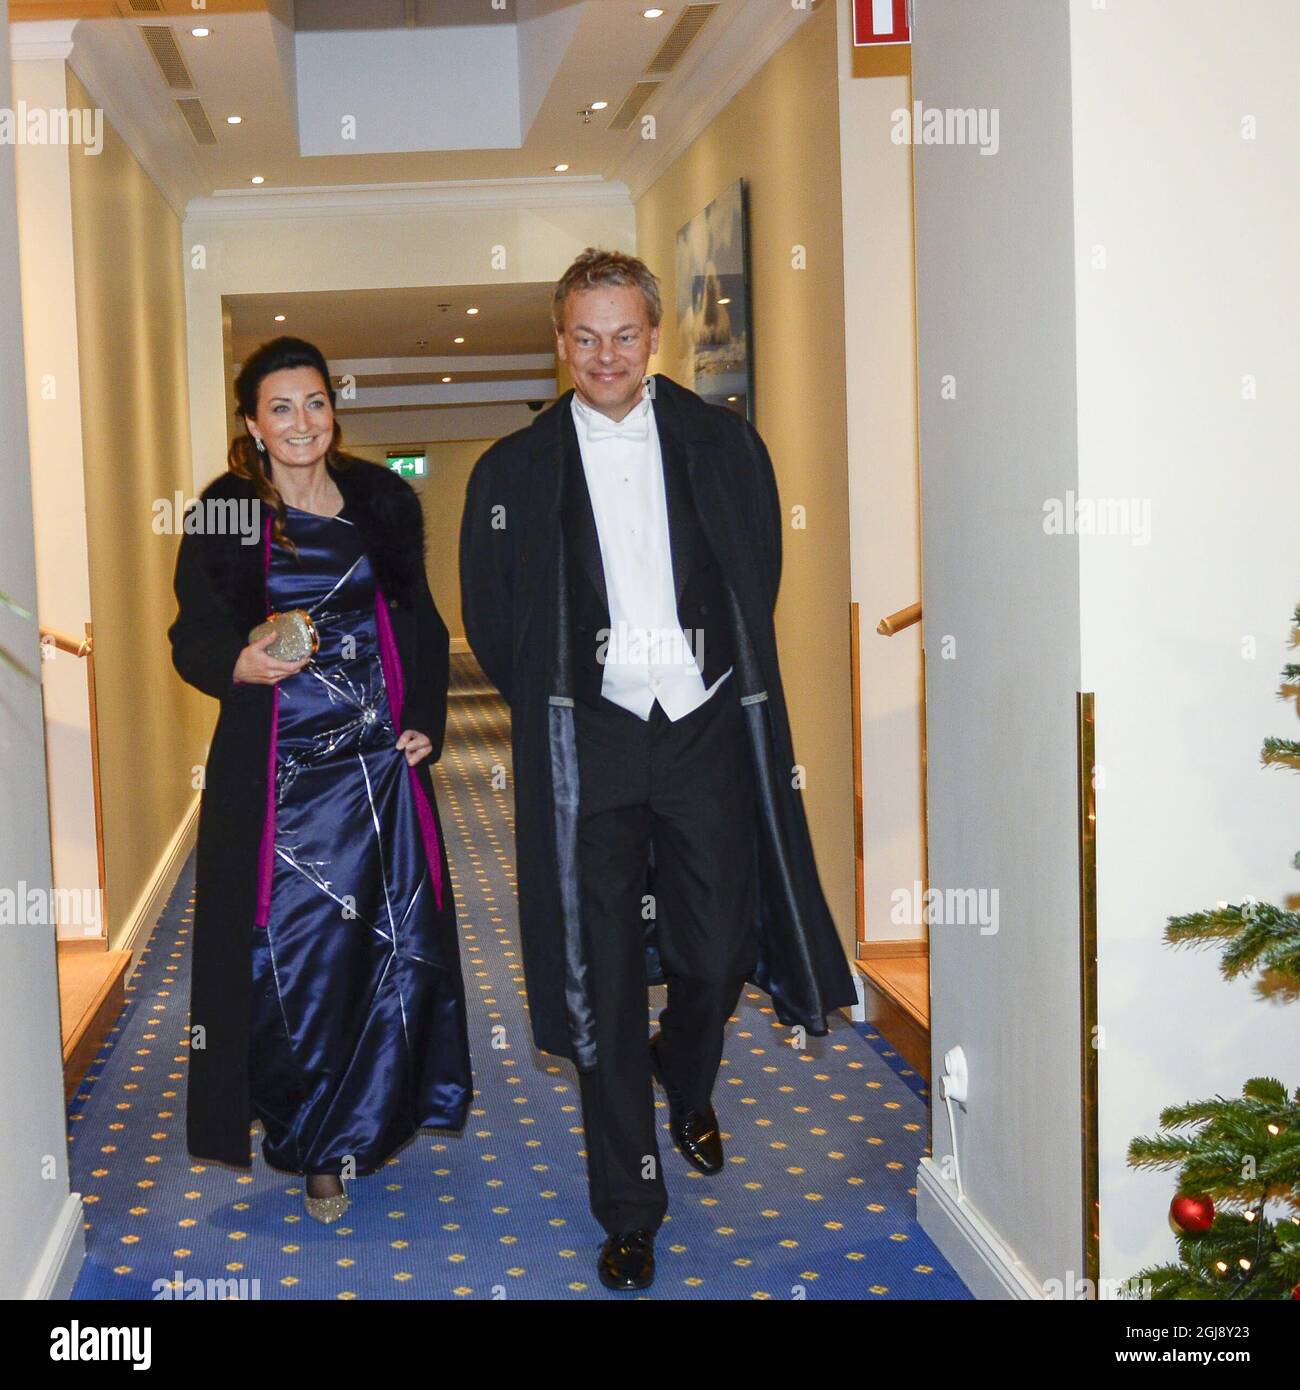 STOCKHOLM 2014-12-10 The 2014 Nobel Physiology or Medicine laureates Edvard Moser och May-Britt Moser is seen leaving Grand Hotel for the Nobel ceremony in Stockholm,Sweden, Decemeber 10, 2014.The couple has been awarded the Nobel Price in Physiology or Medicine for their discoveries of cells that constitute a positioning system in the brain. They share the price with American British John O Keefe. Foto: Maja Suslin / TT / kod 10300  Stock Photo